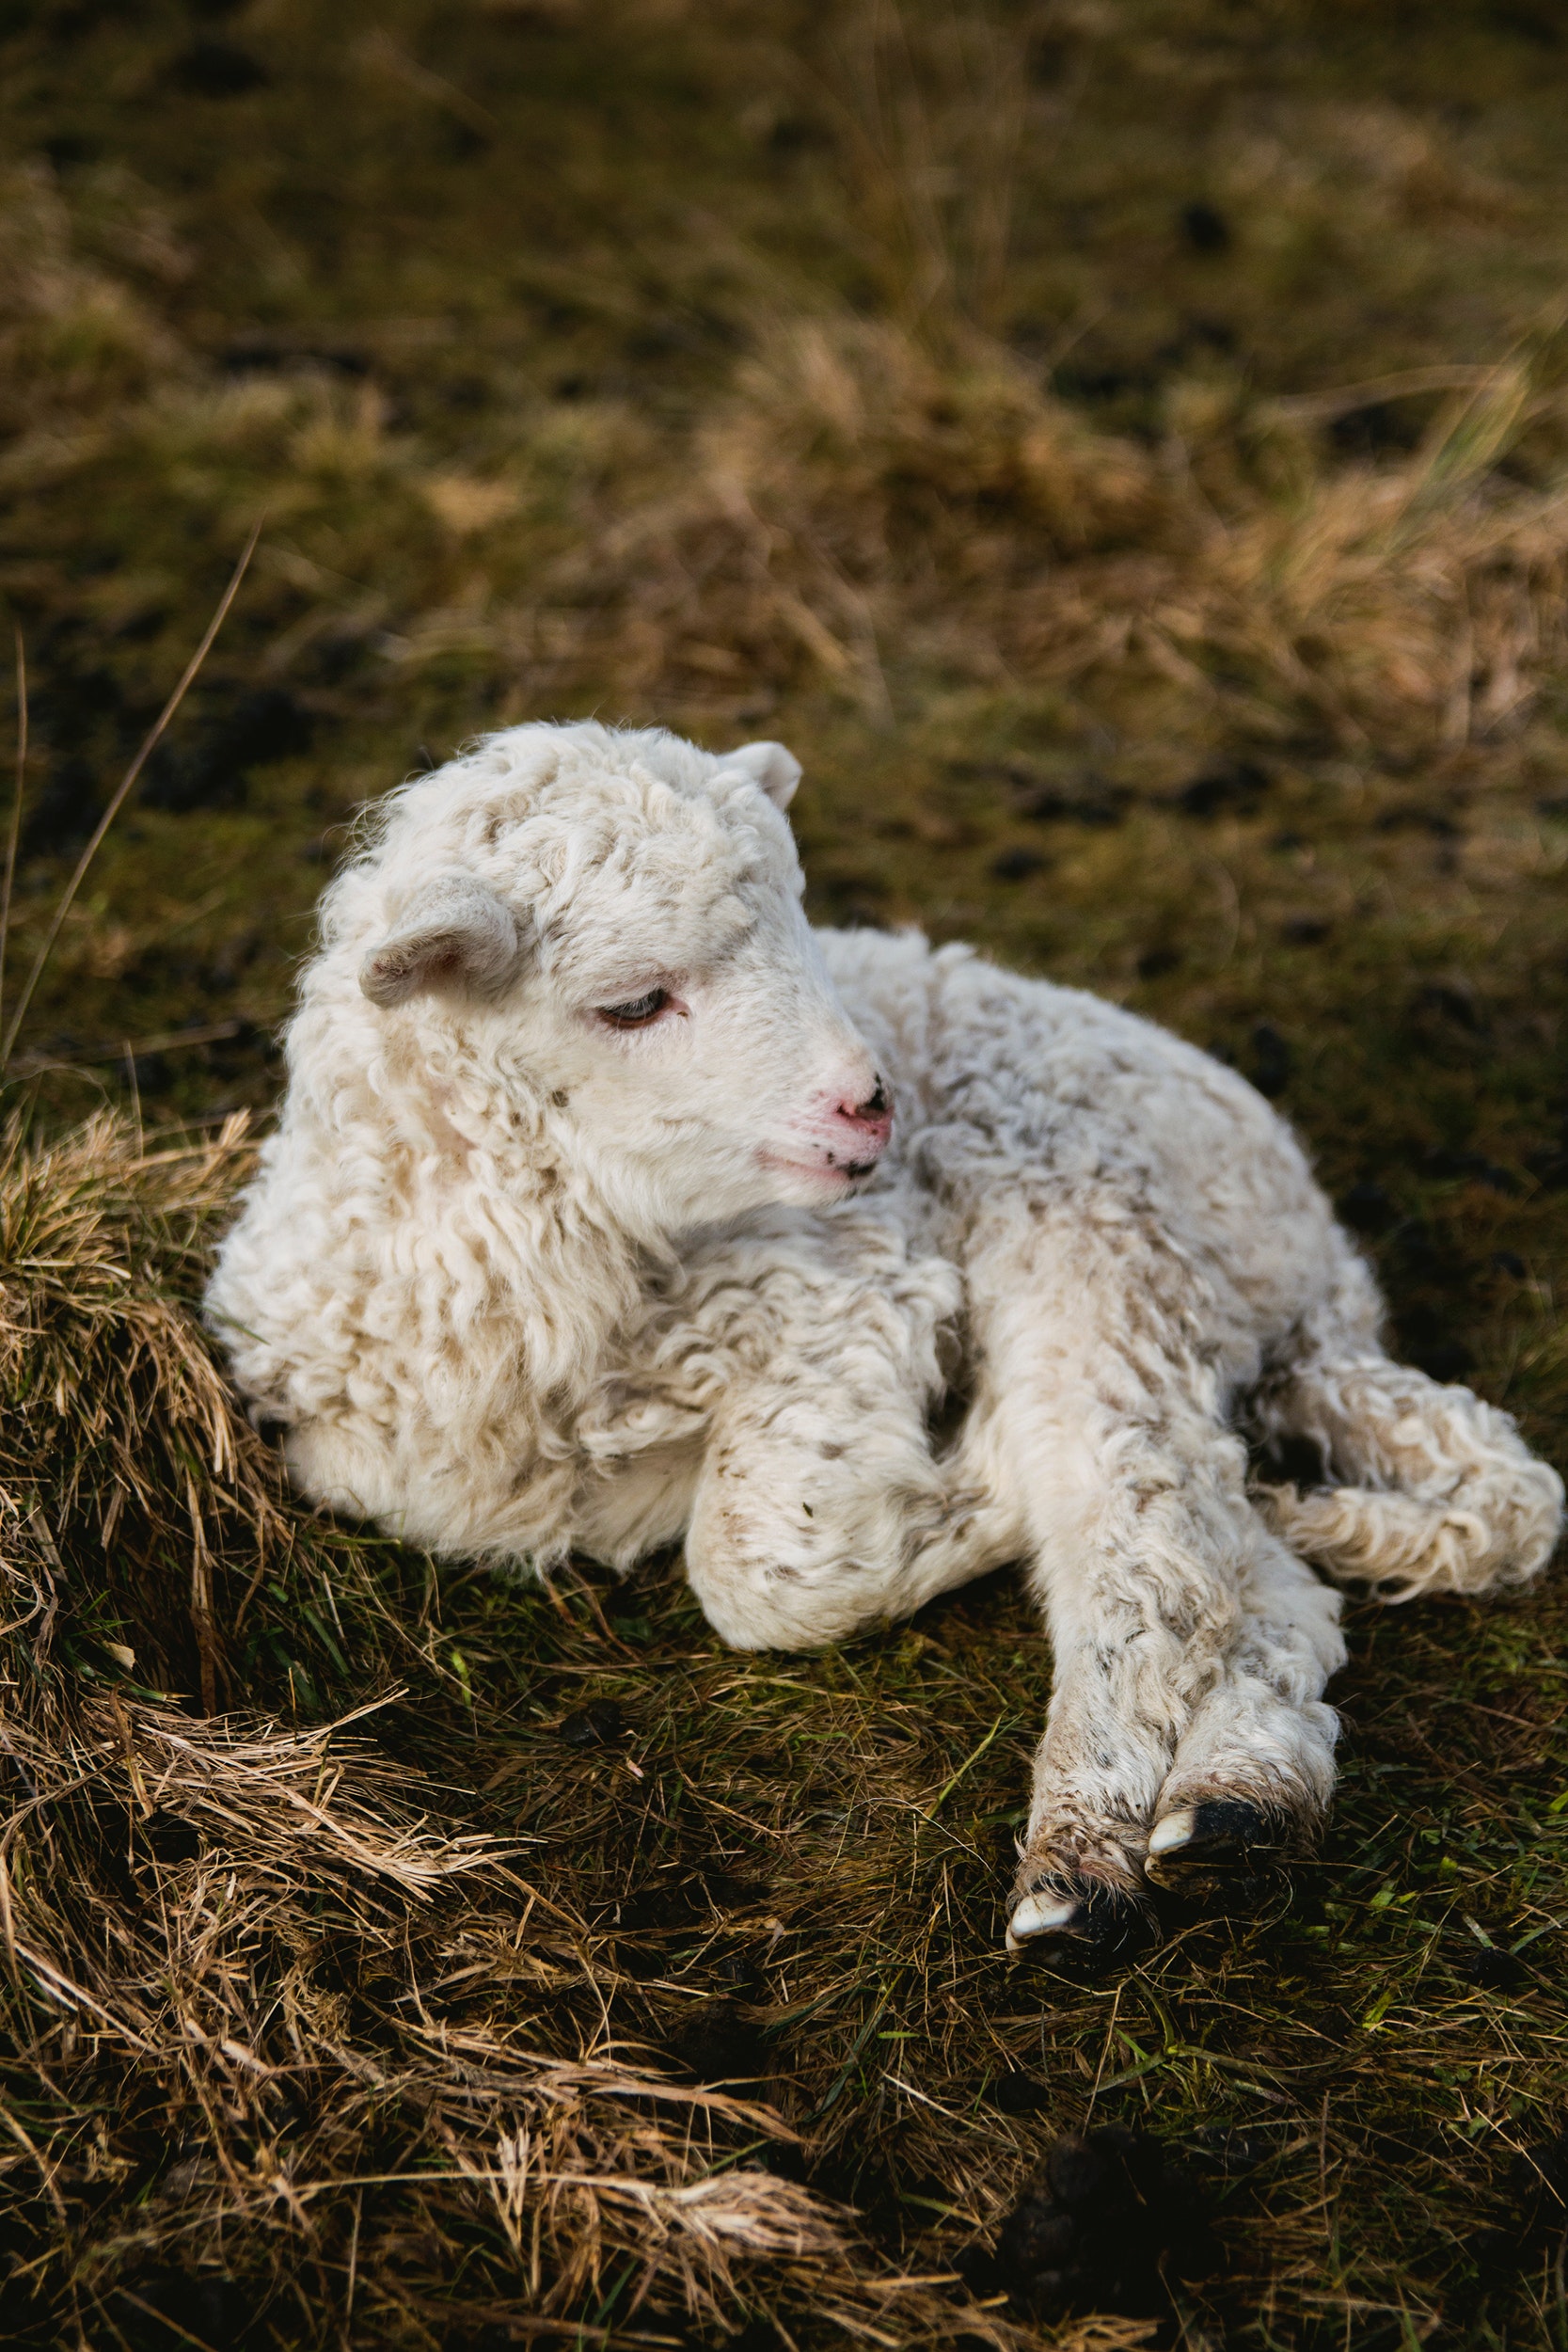 Selective Photography of White Lamb on Hay, Livestock, Young, Wool, Wildlife, HQ Photo